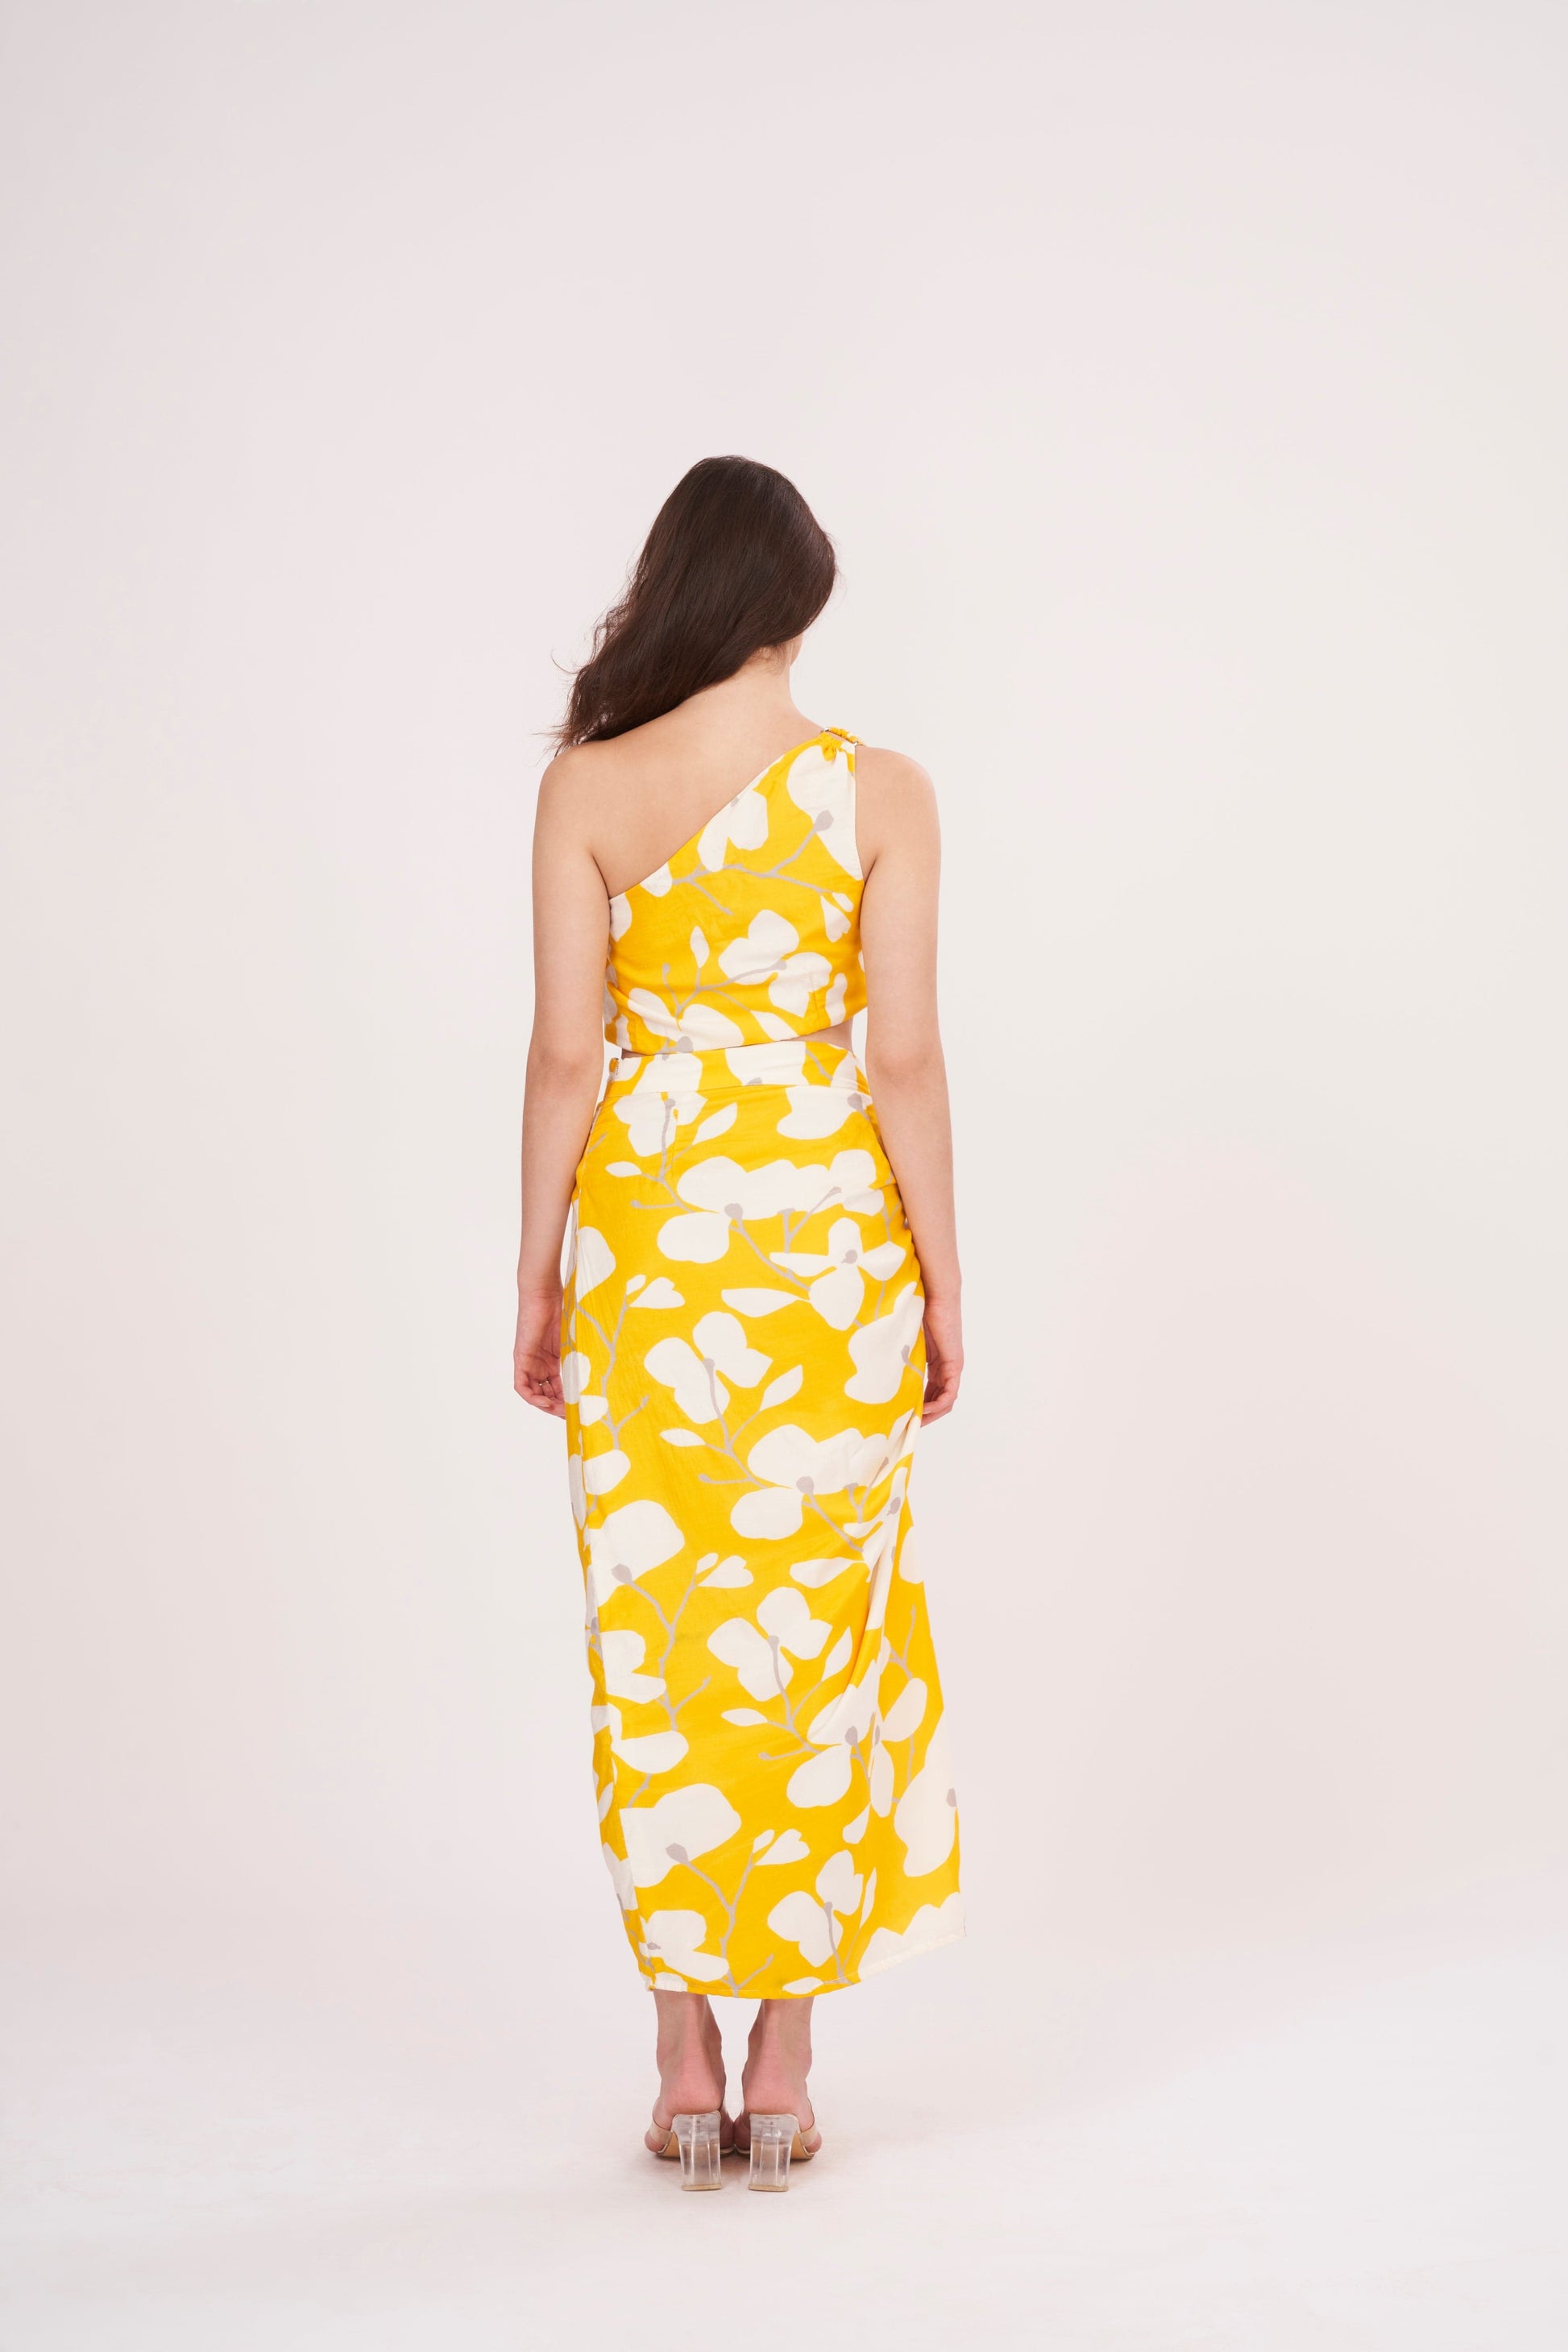 Stylish long skirt with vibrant yellow floral print, perfect for summer. Flattering waist cut creates stunning silhouette, while slit adds touch of elegance. 